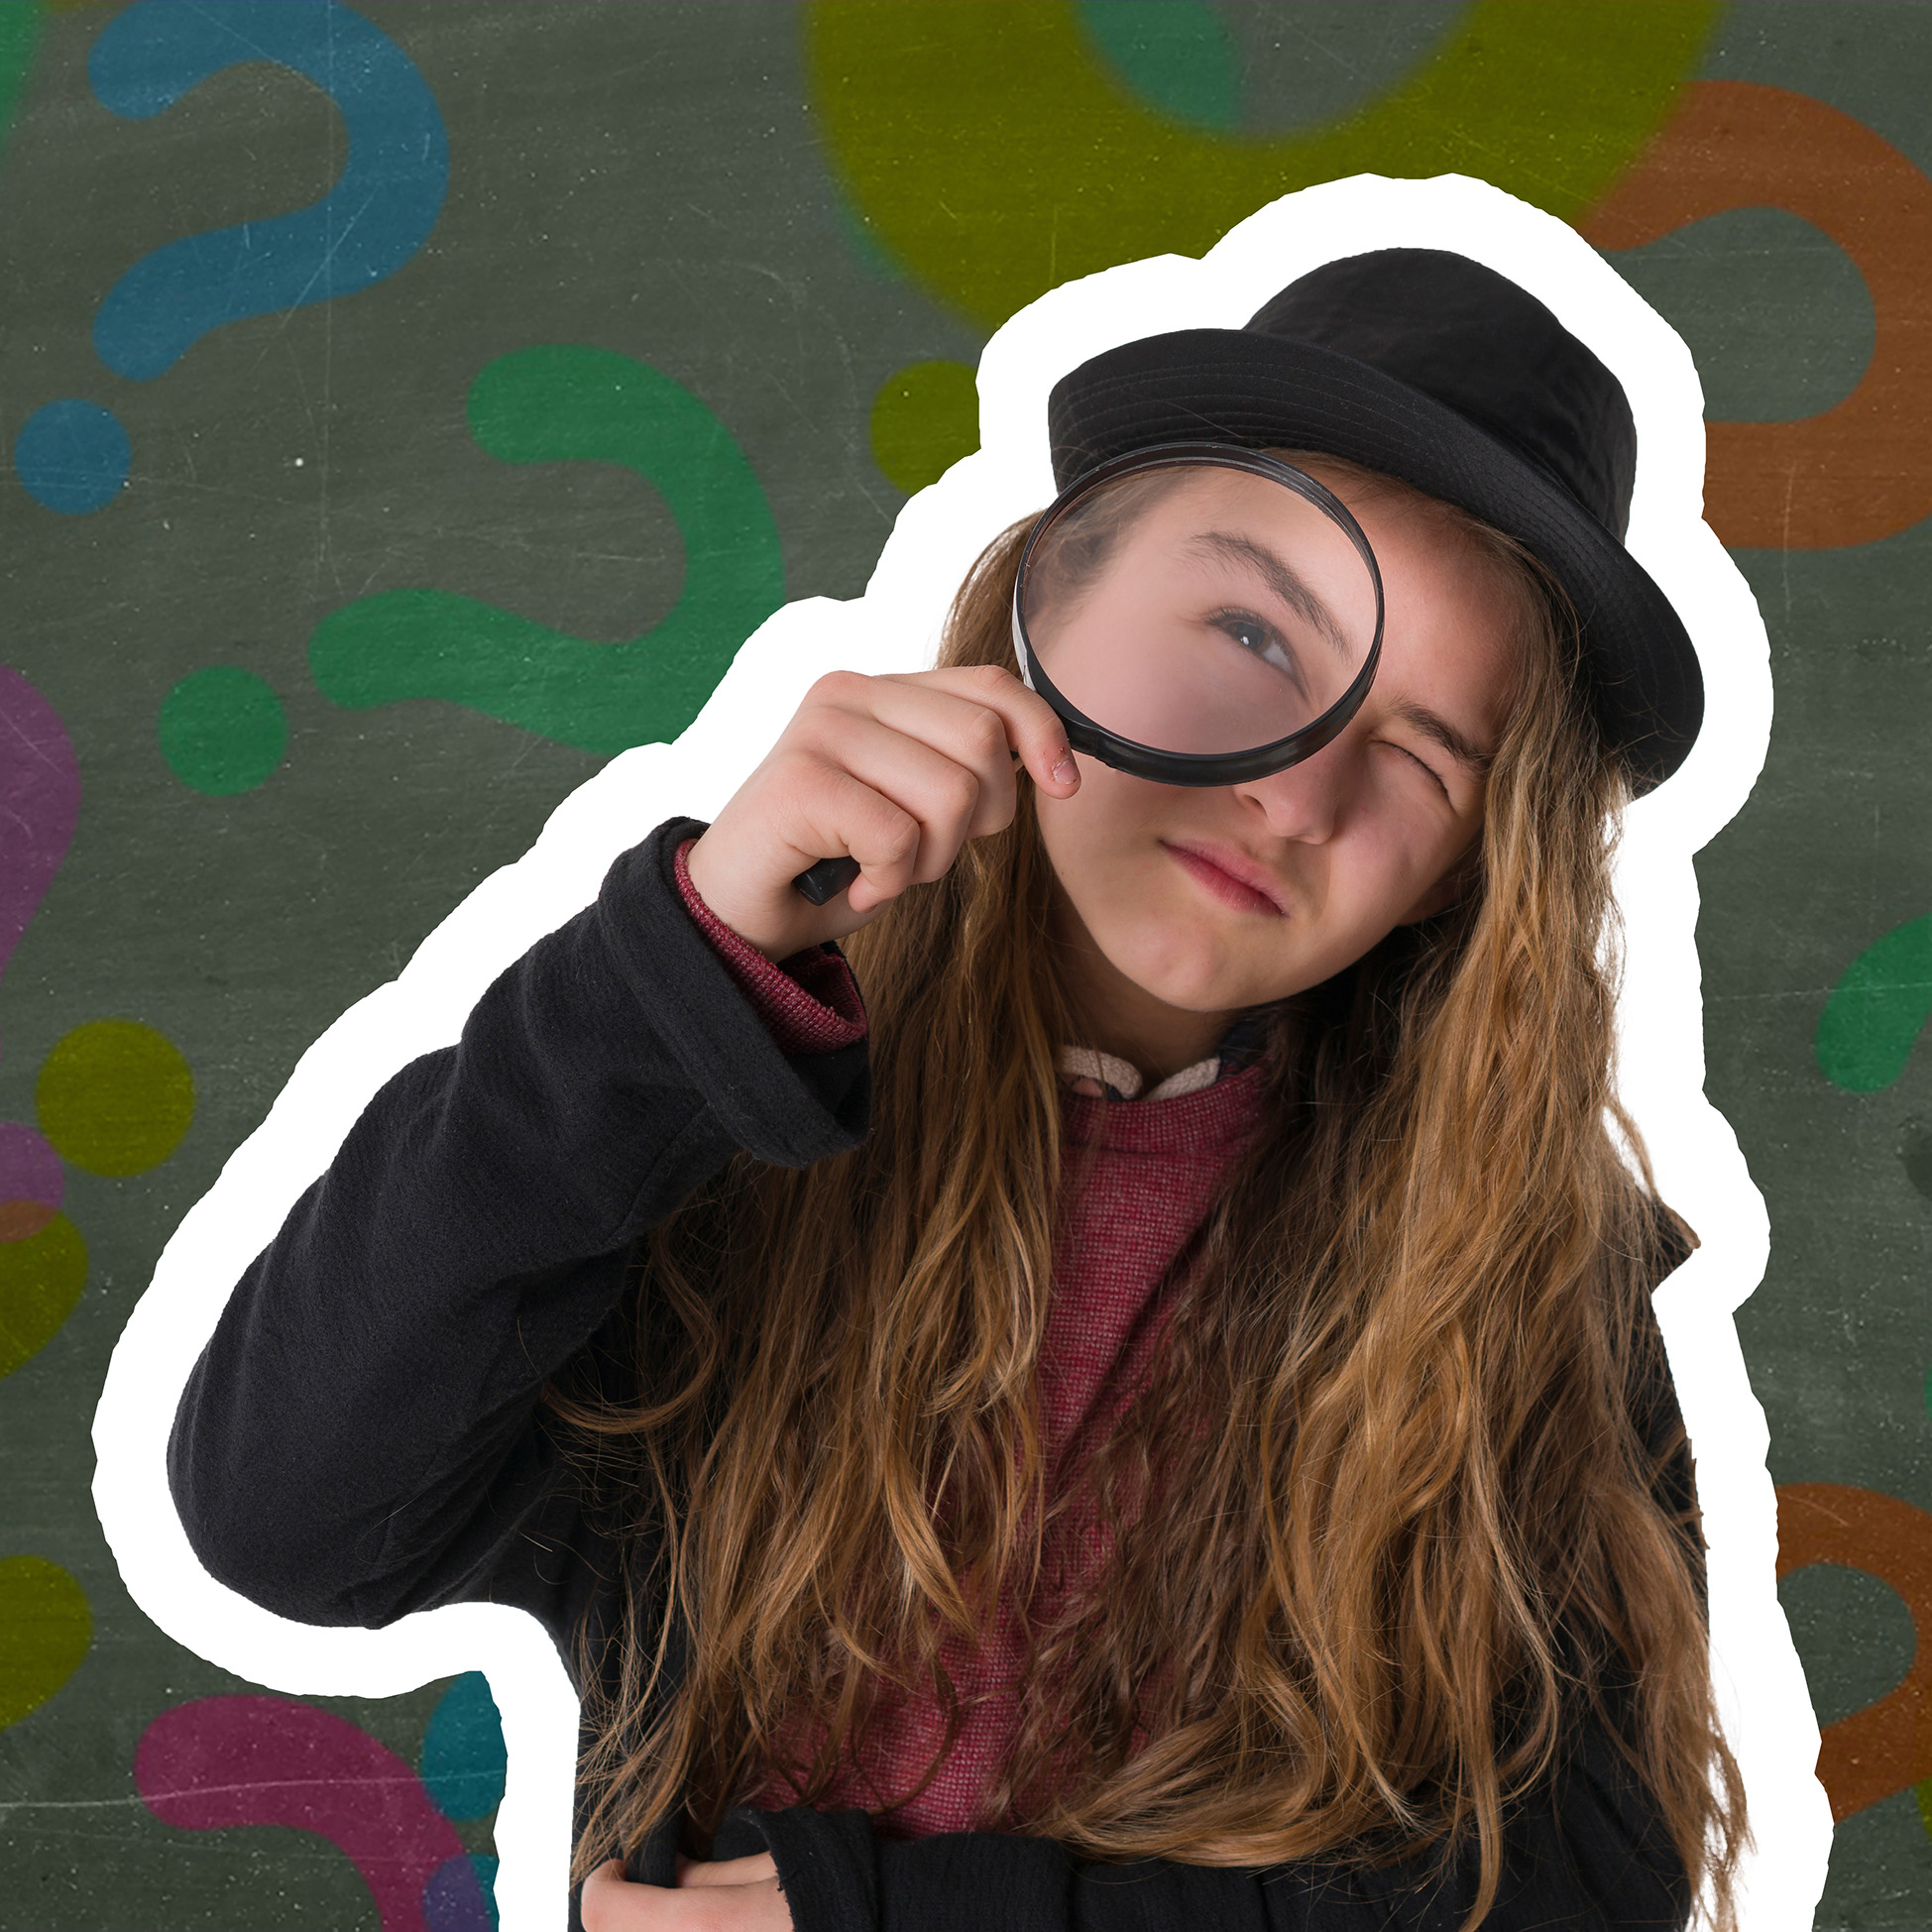 Girl wearing a hat looking through a magnifying glass